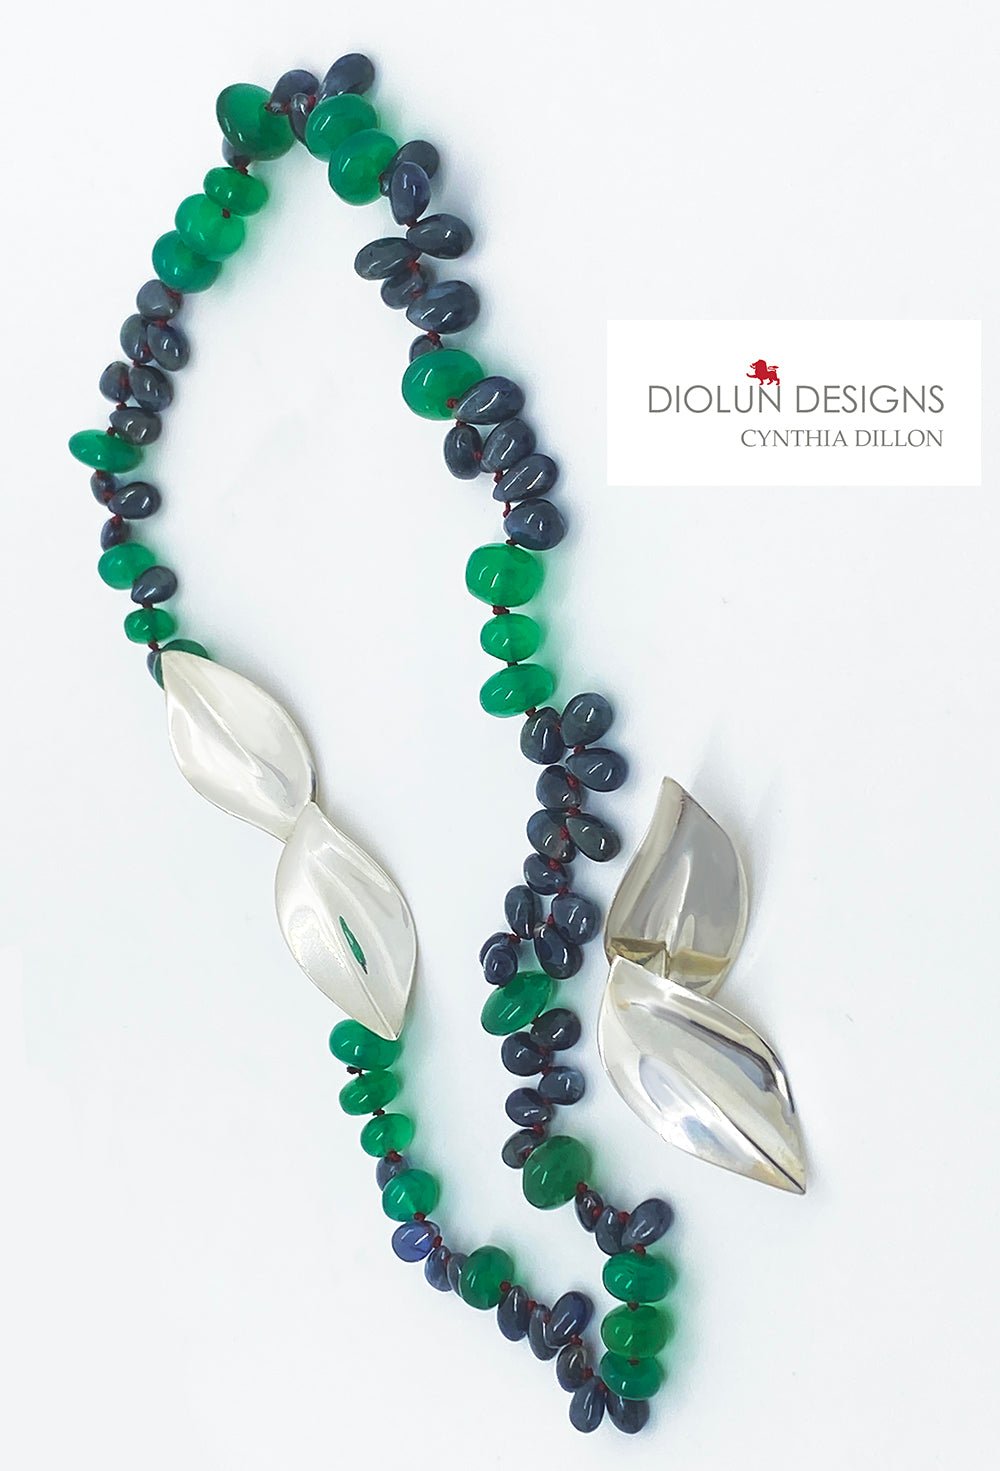 Necklace - Blue Sapphire Drops and Green Onyx w.  Sterling Silver "Leaves" Clasp - DiolunDesigns